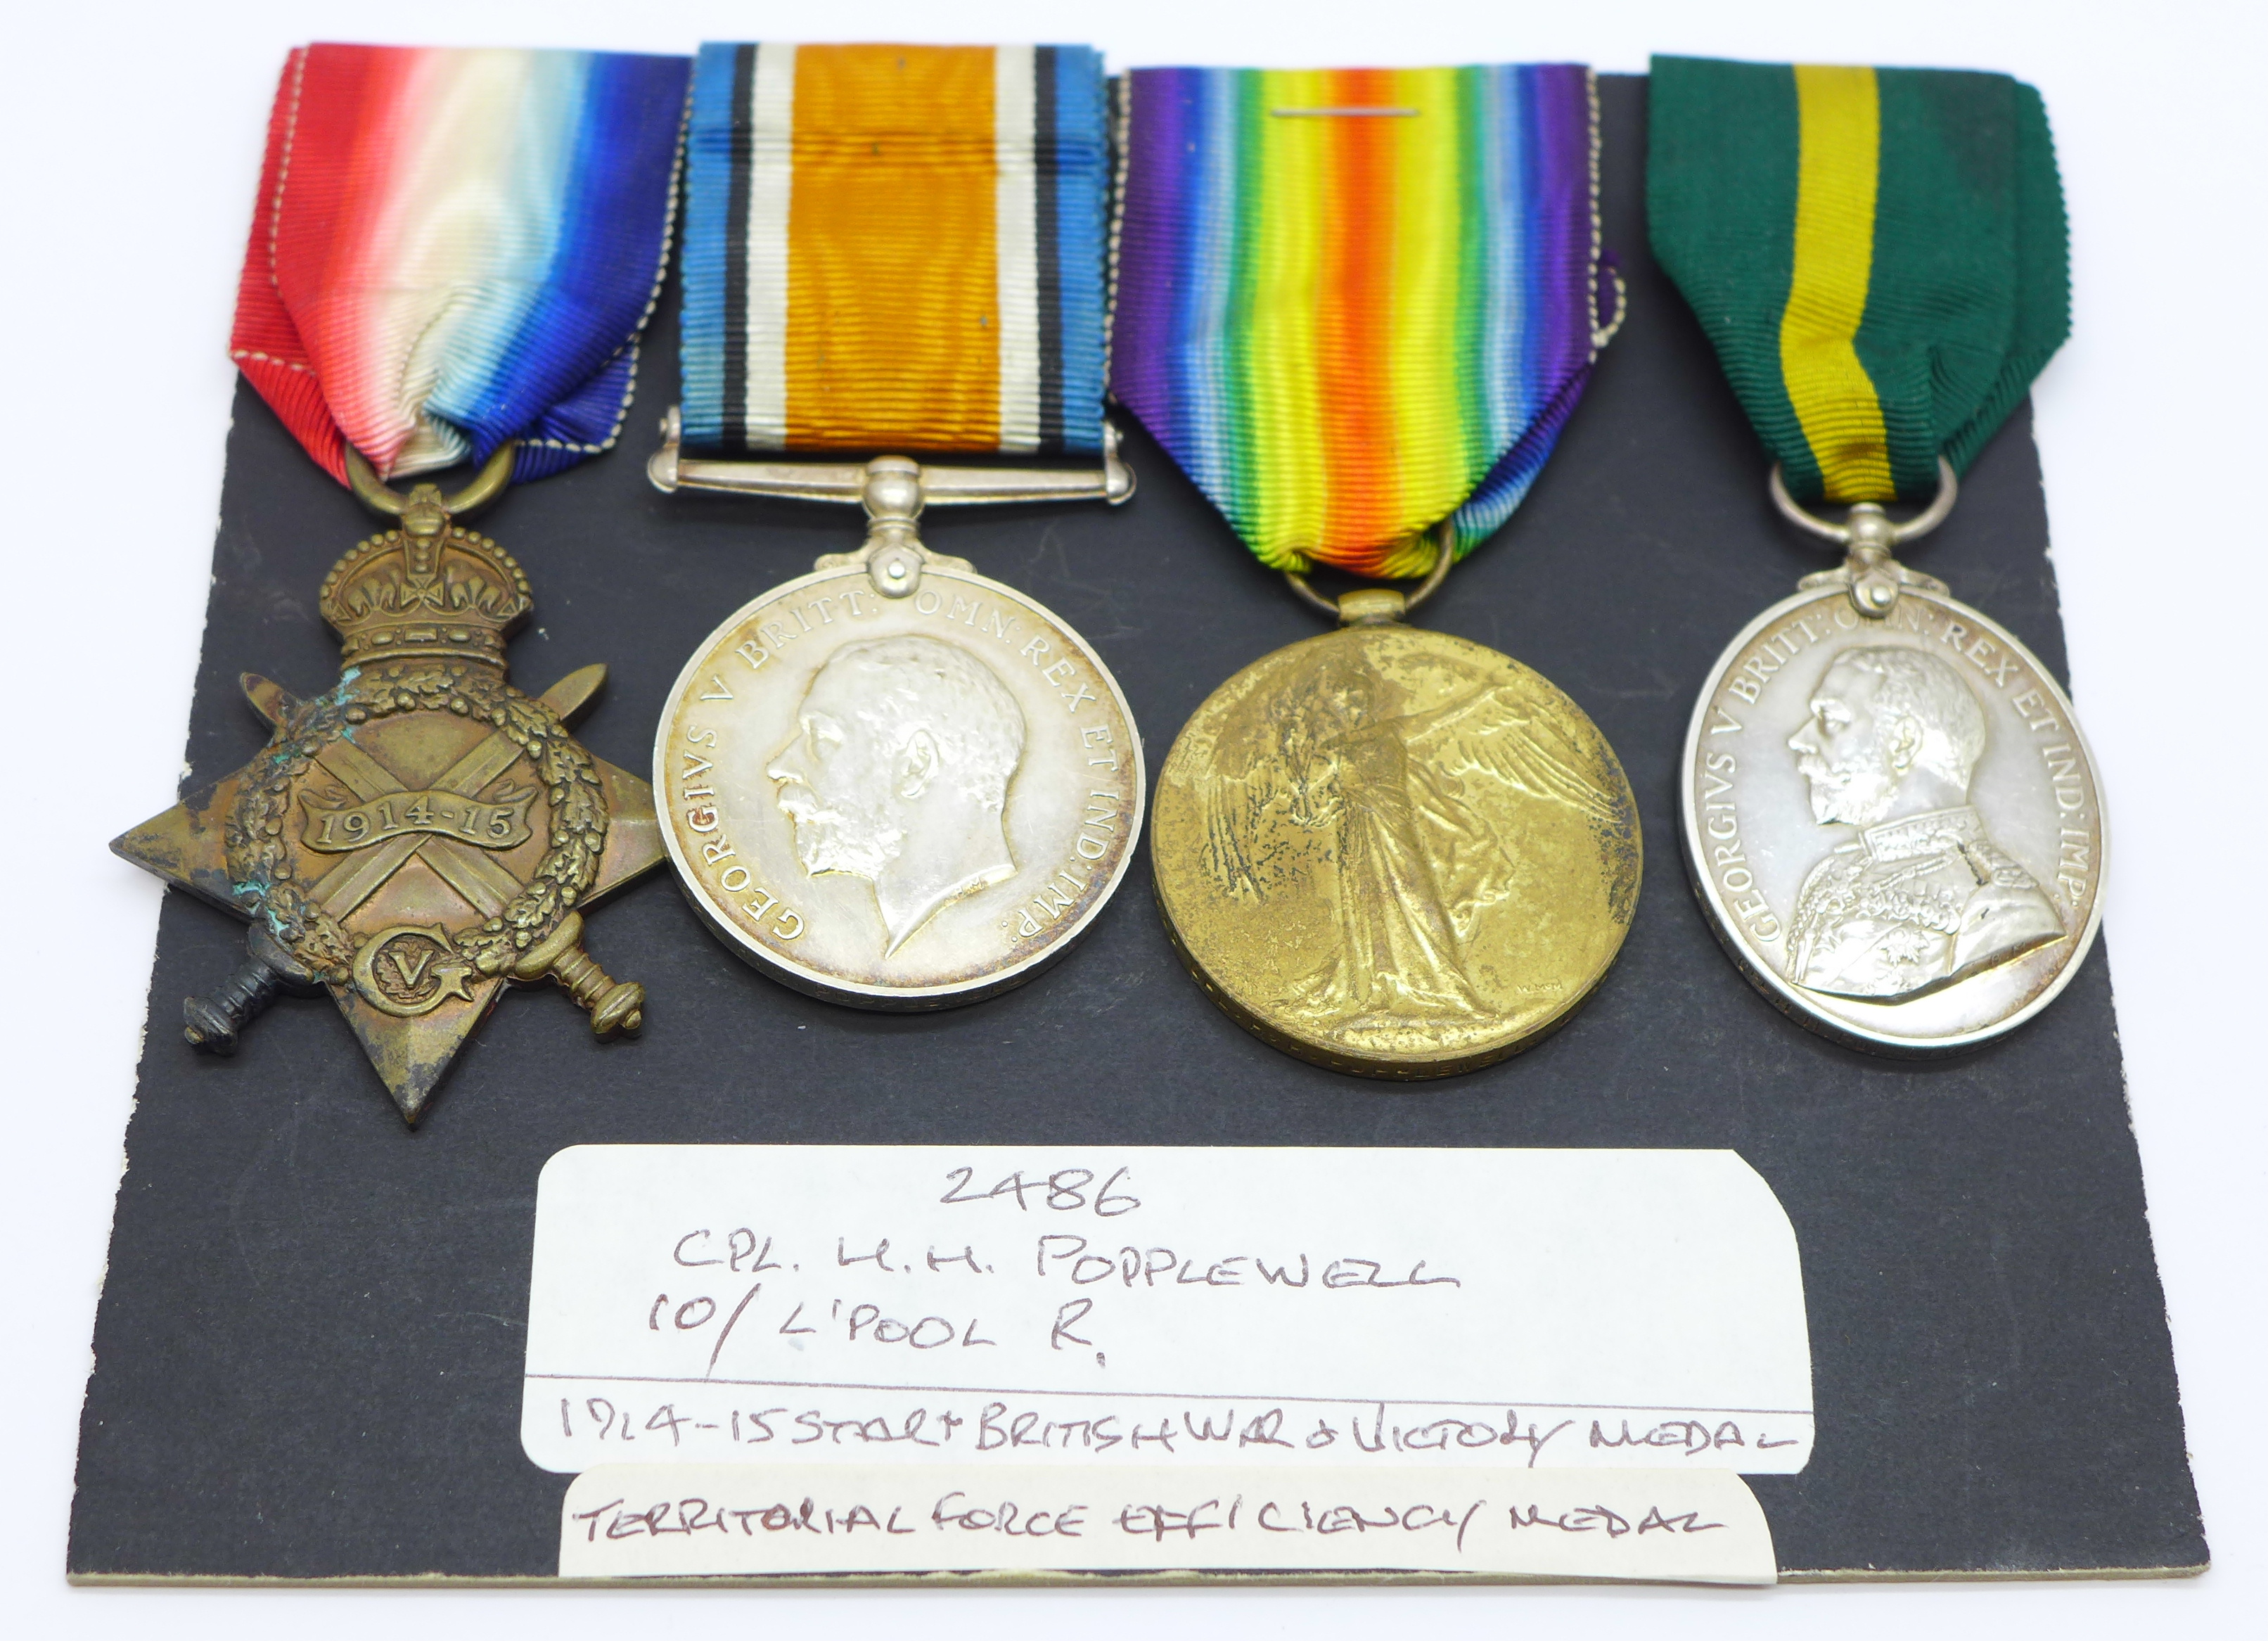 Four medals; WWI trio and Territorial Efficiency medal to 2486 Cpl. H.H. Popplewell 10/L'Pool R. - Image 2 of 11